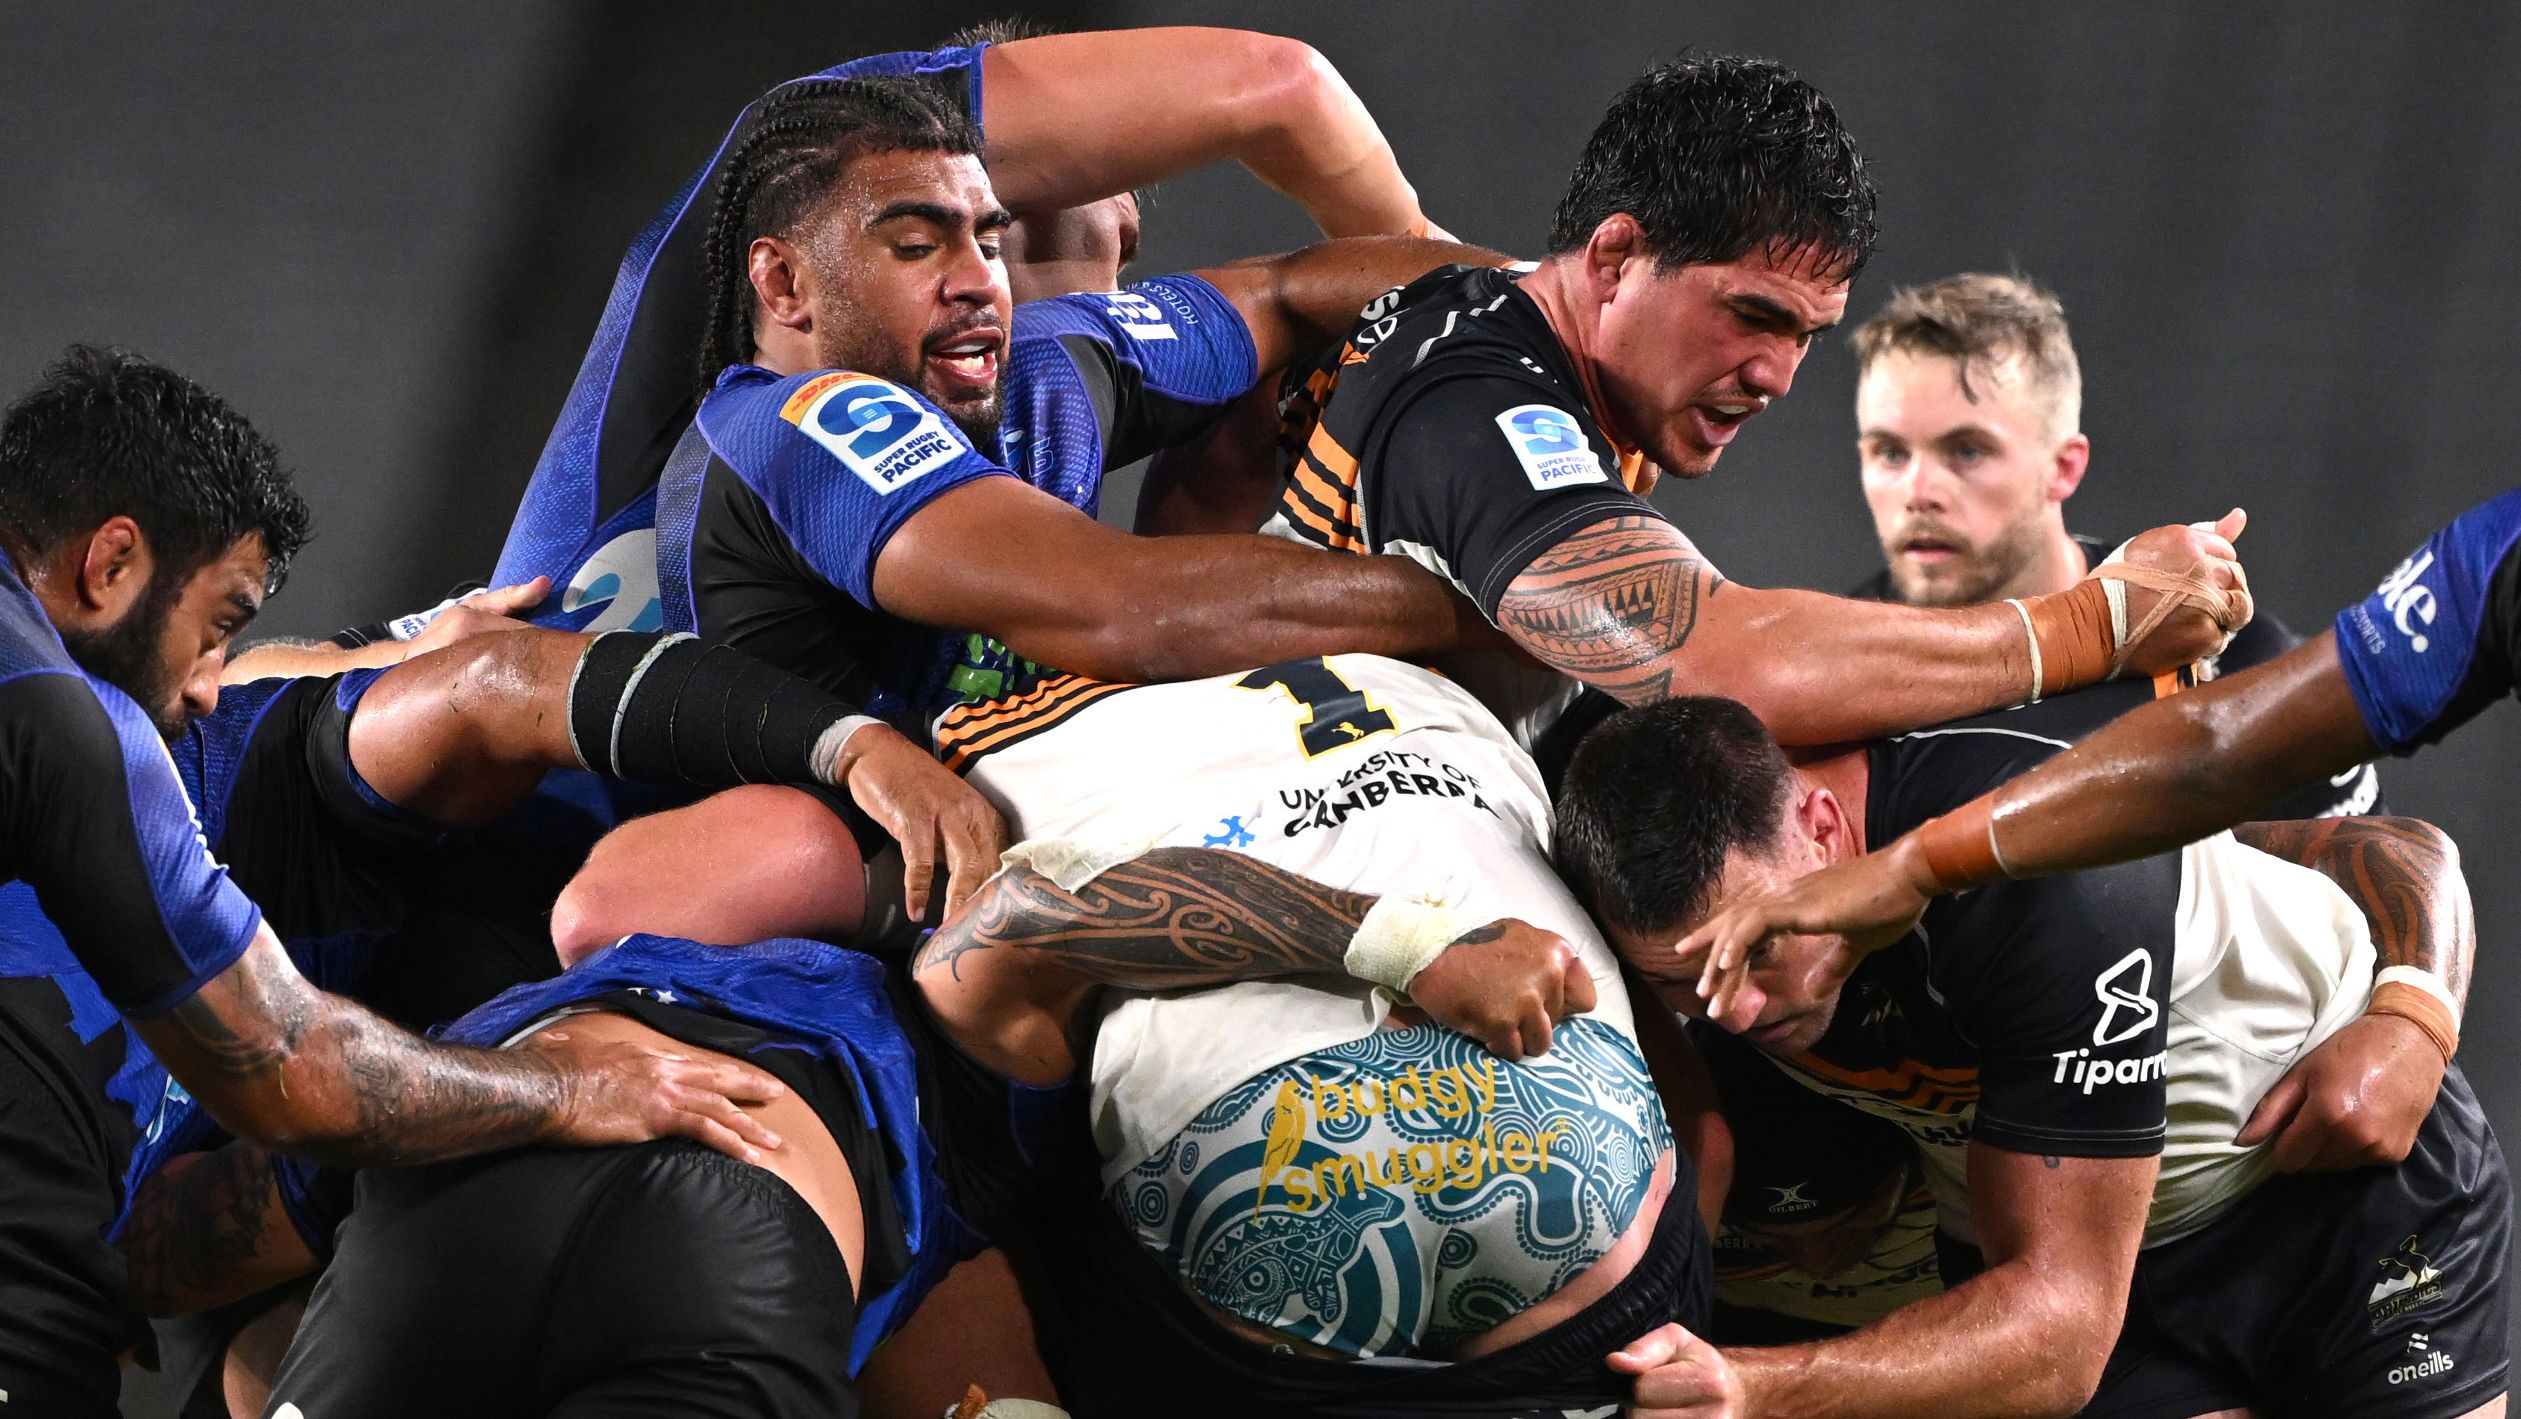 Hoskins Sotutu of the Blues tackles Darcy Swain of the Brumbies.